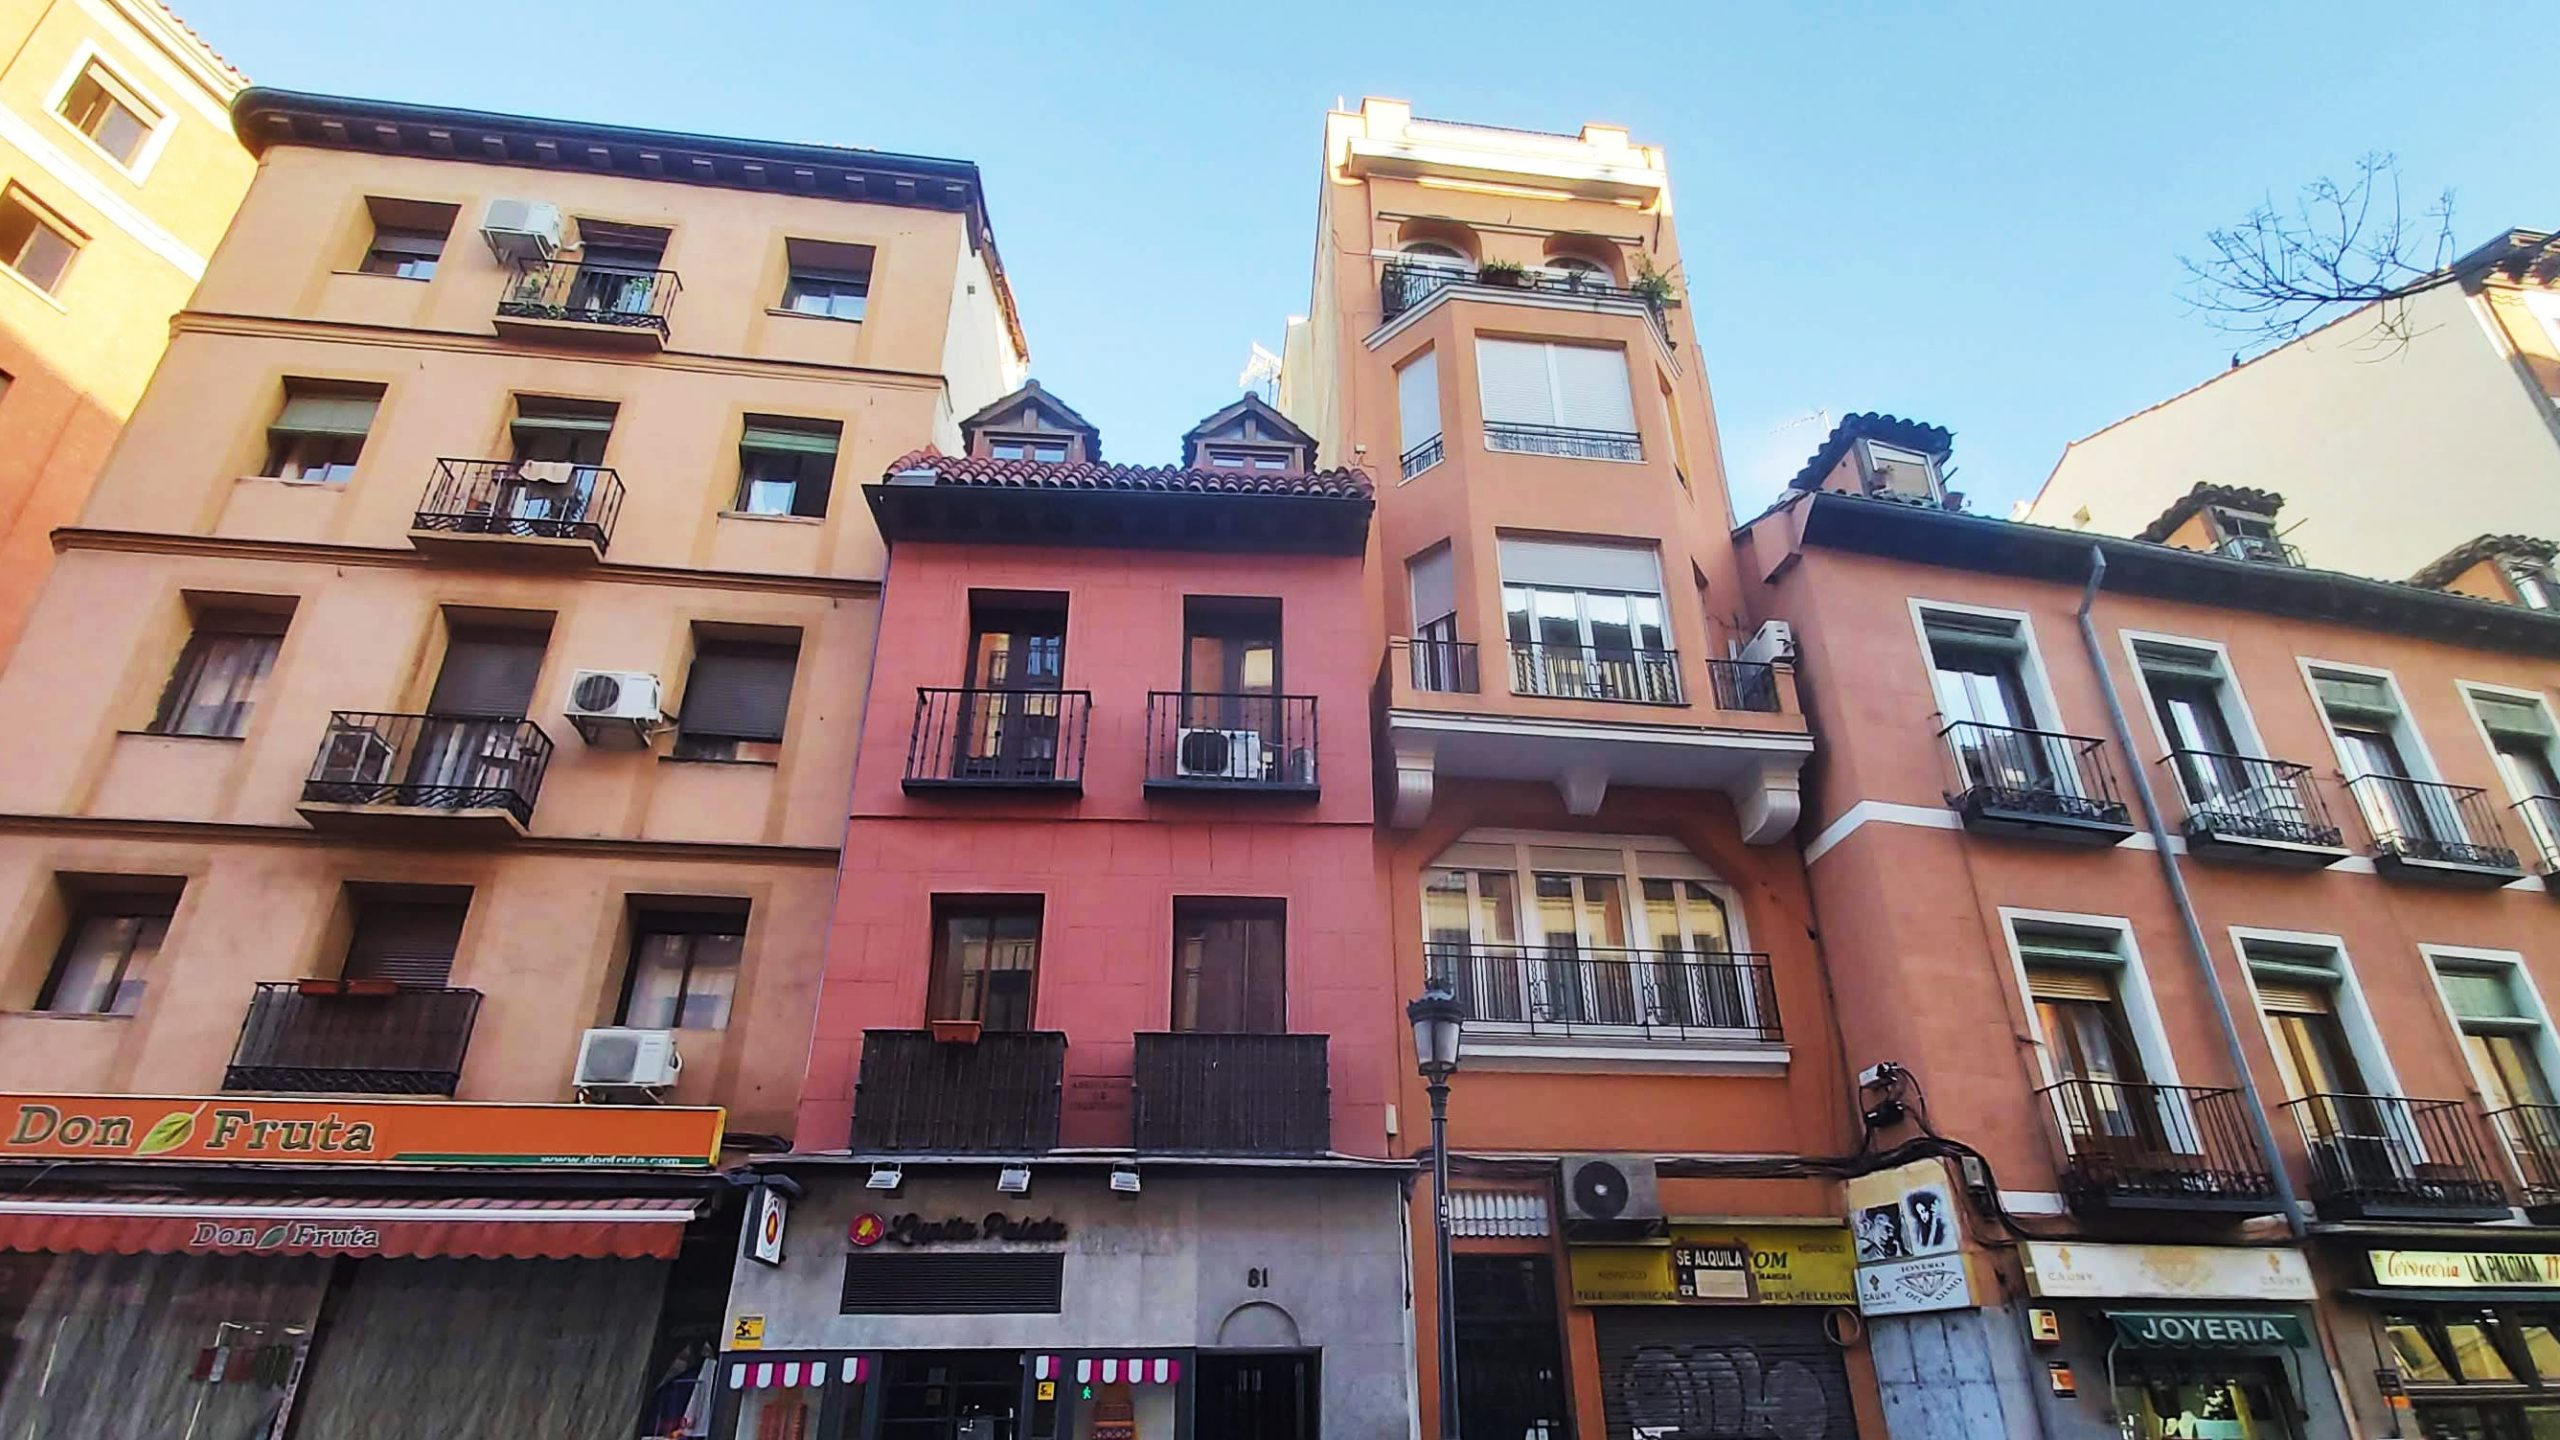 Occupying the southwestern portion of Distrito Centro, La Latina is one of the oldest and coolest of Madrid's quarters